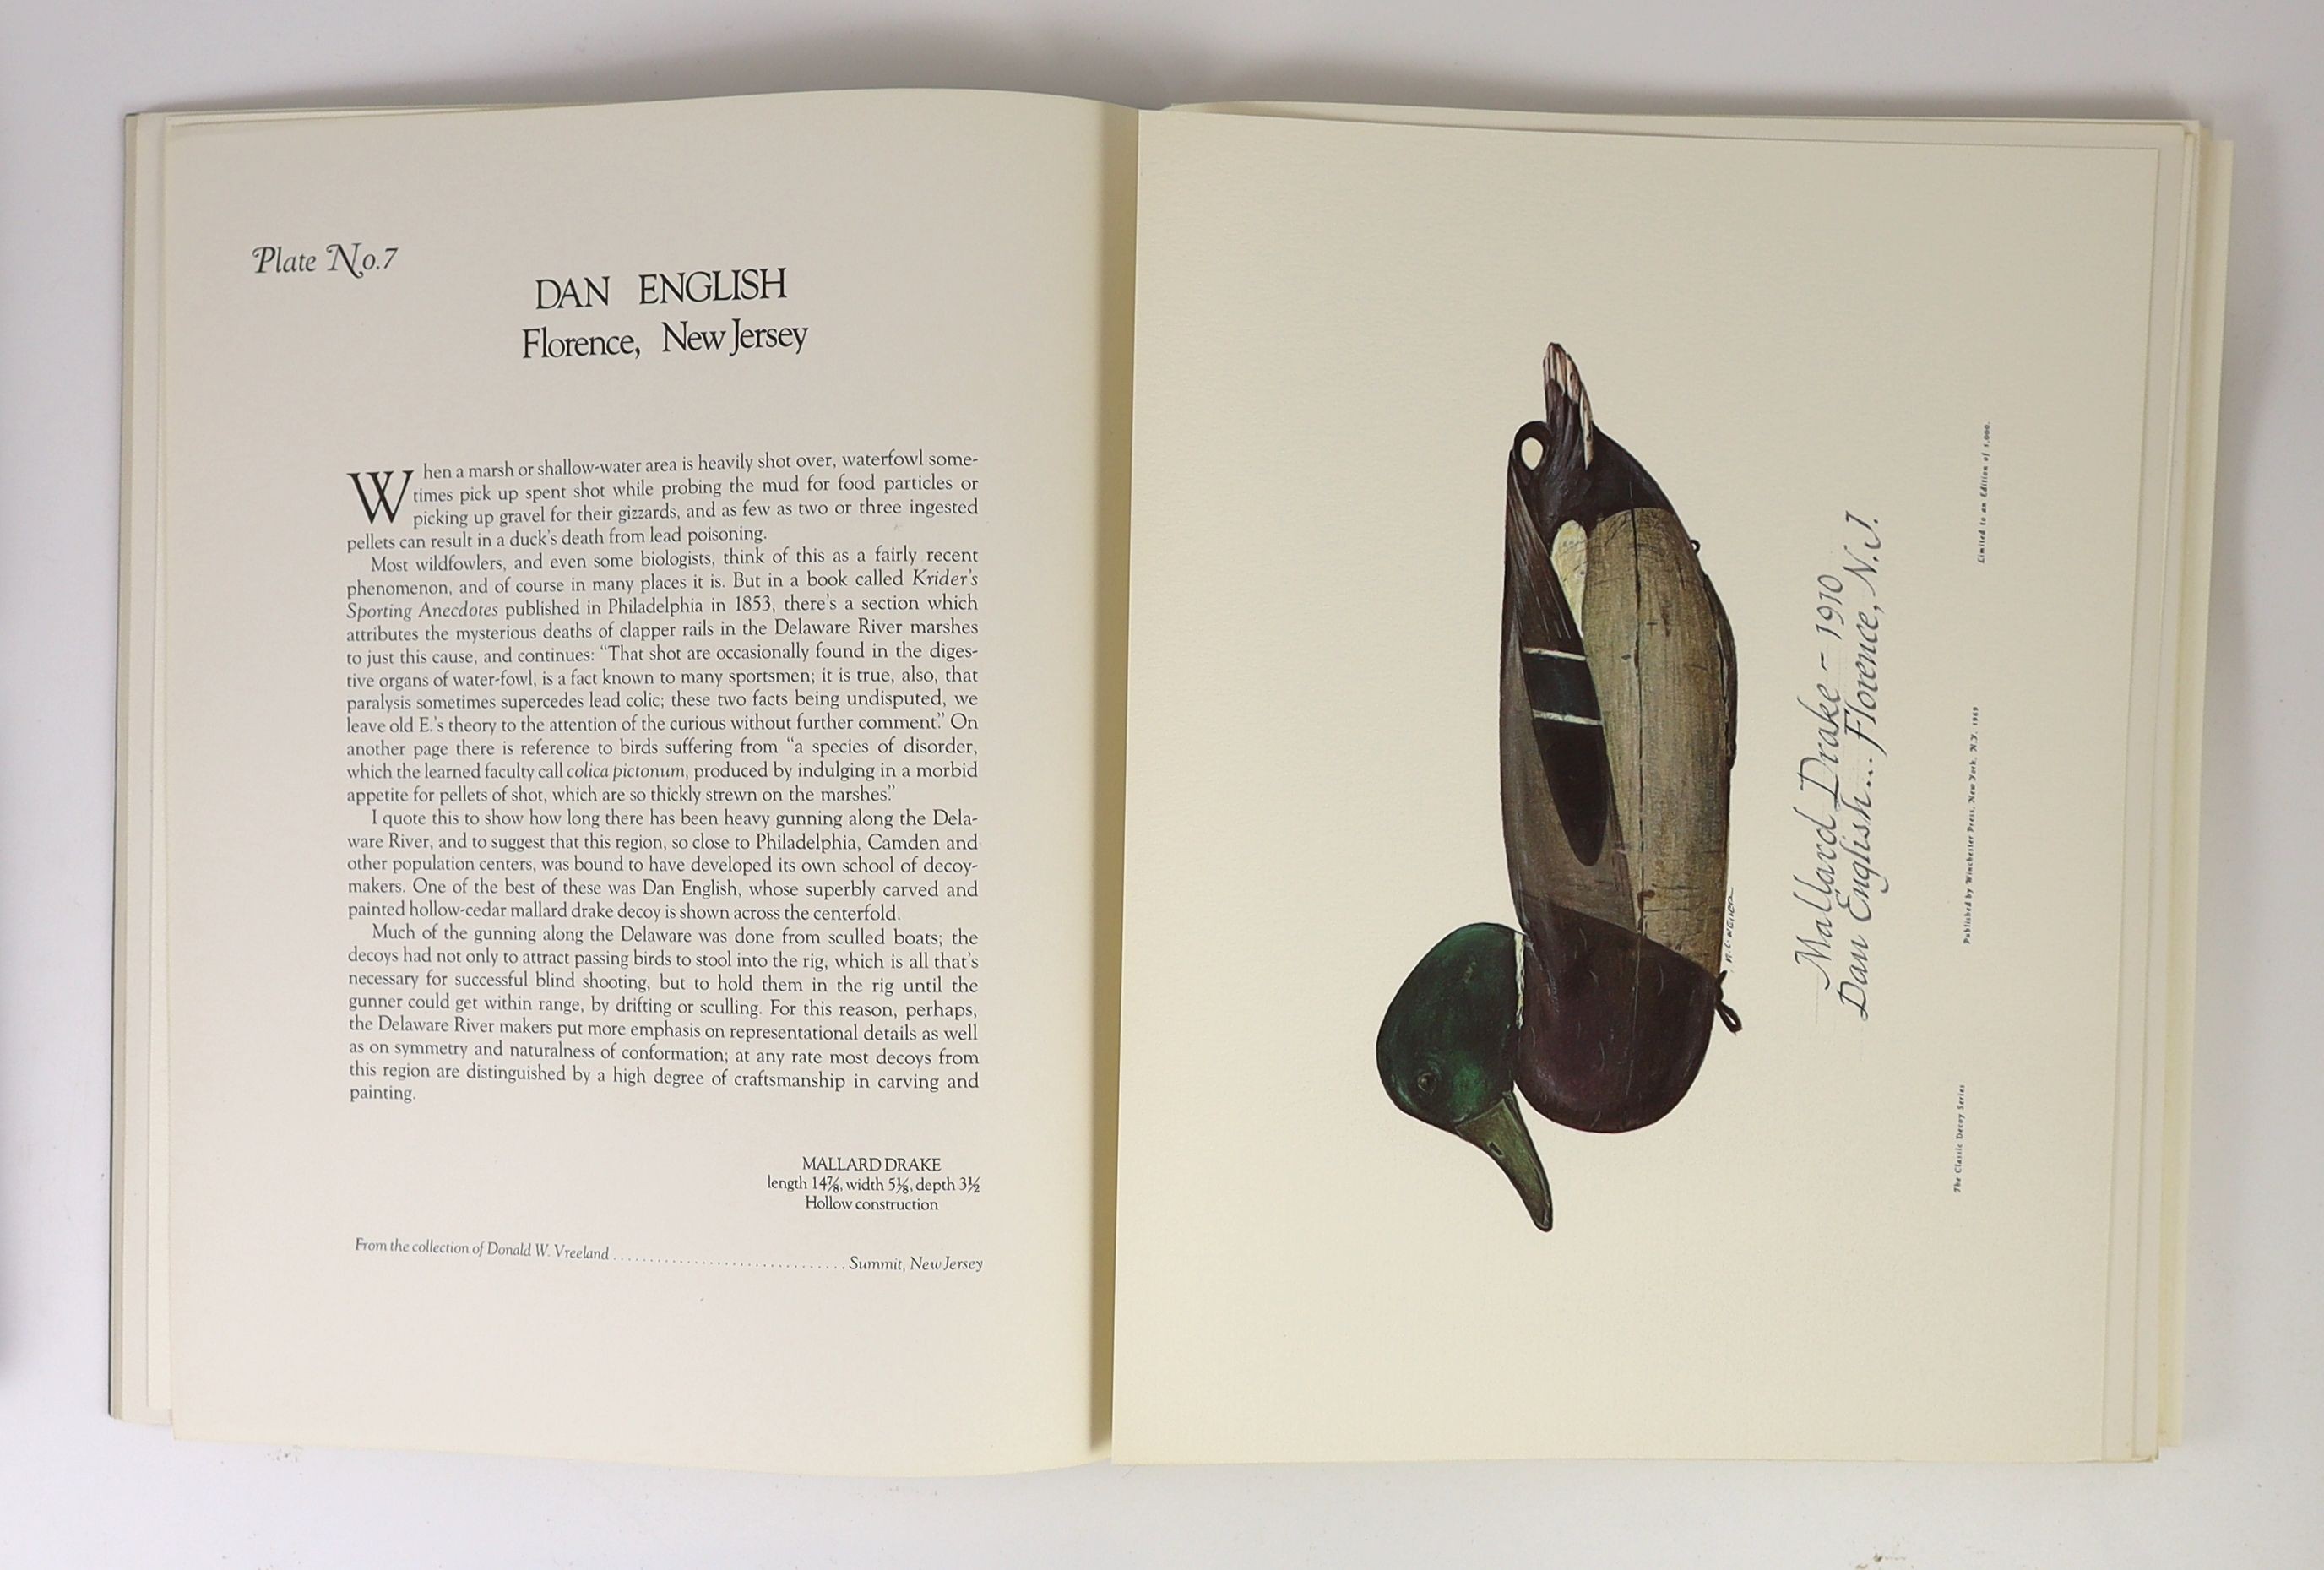 Weiler, Milton C. [Artist] Zern, Ed. [Text] The Classic Decoy Series. A Portfolio of Paintings by Milton C. Weiler. Small folio, Winchester Press, New York 1969. 24 loosely inserted coloured plates, soft cover ribbon bin